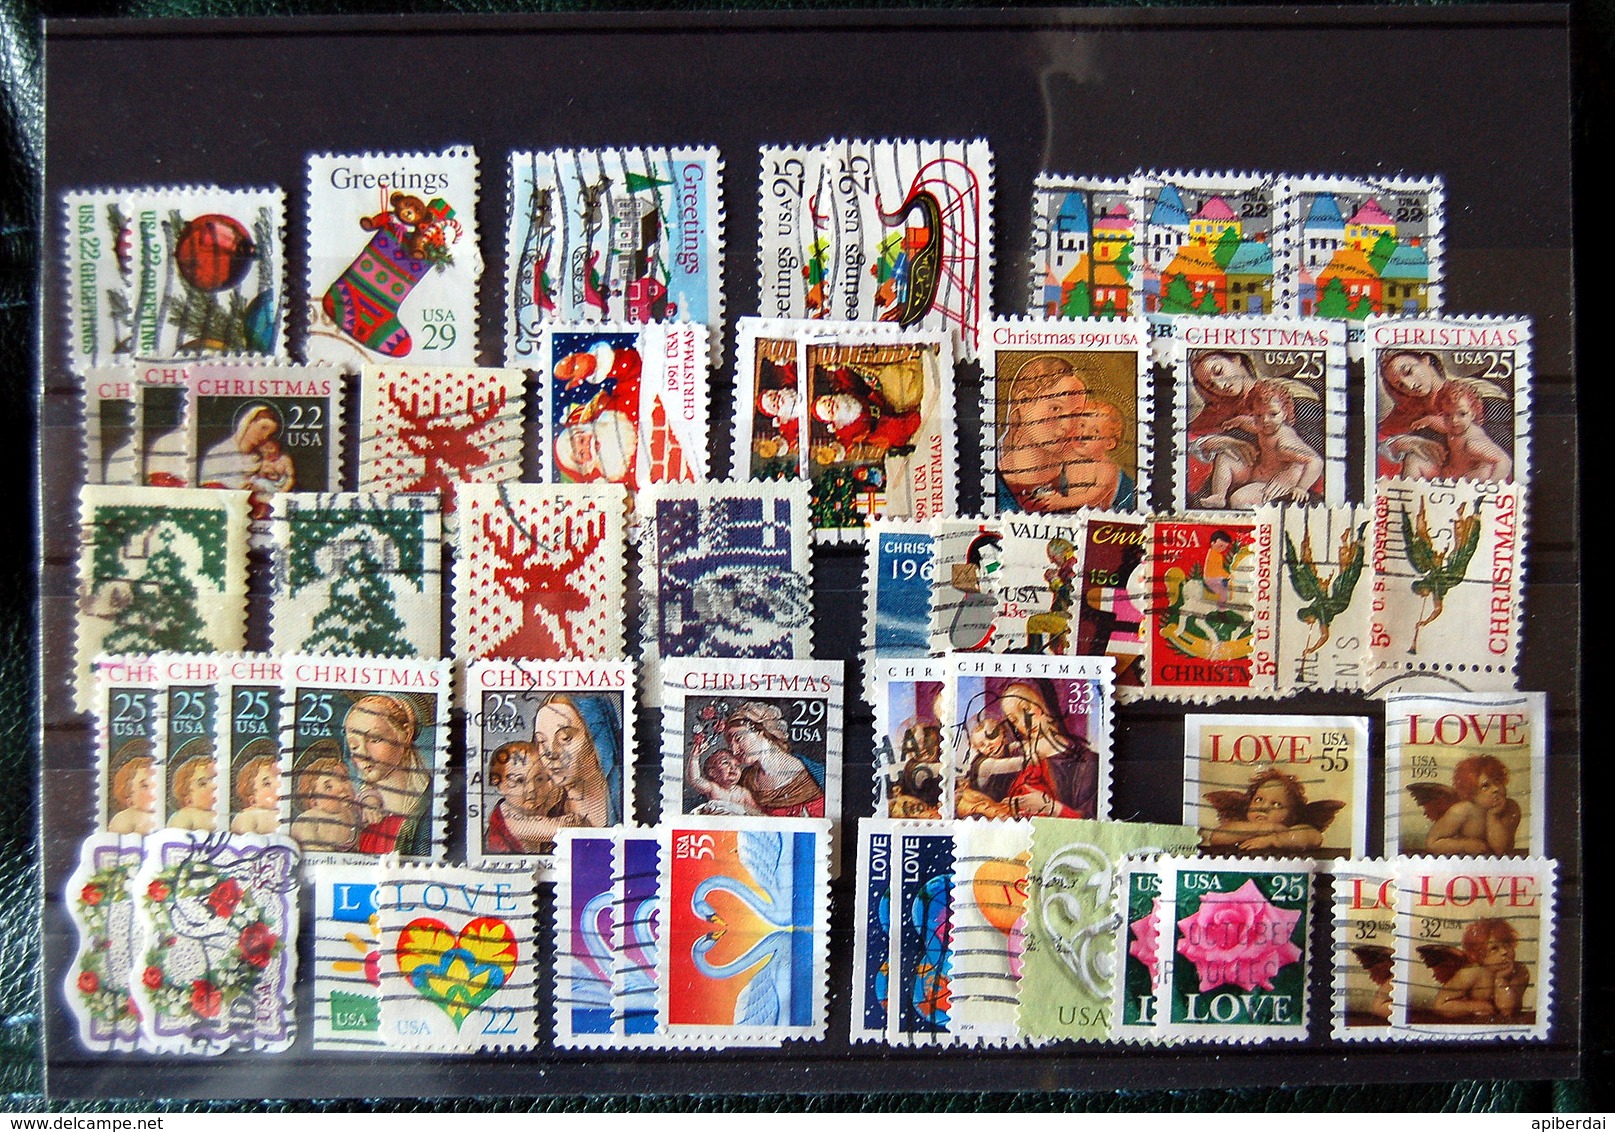 USA - Batch Of 56 Stamps With The Thema Of Christmas, Greetings And Love  (used) - Gebruikt